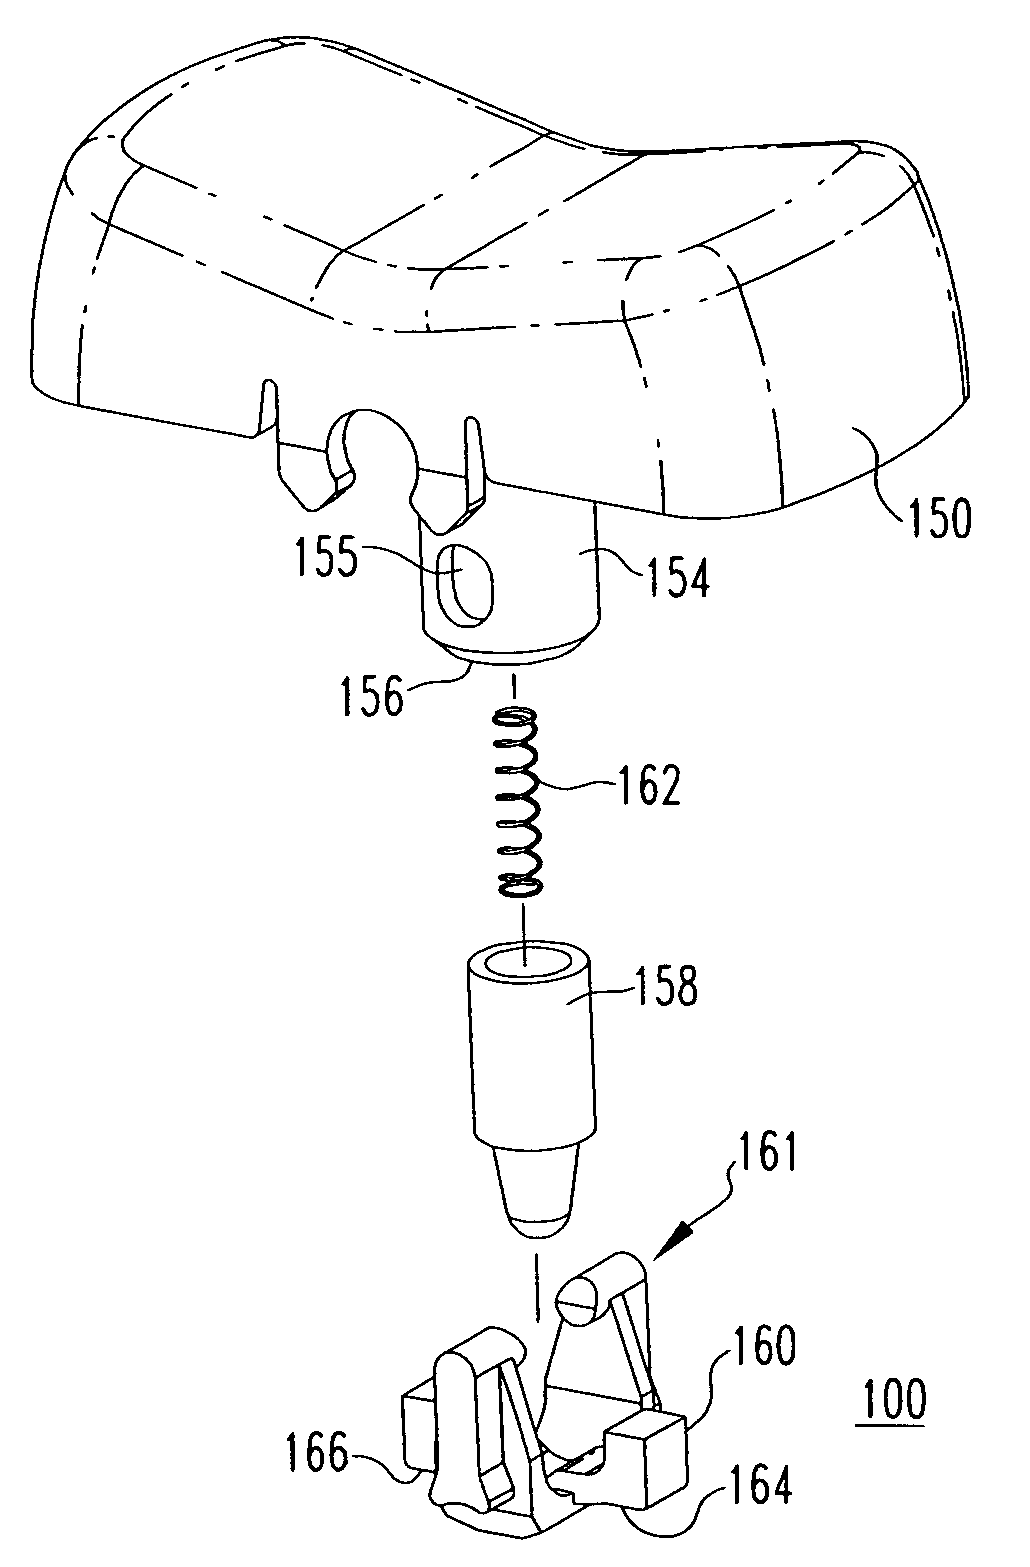 Self-contained actuator subassembly for a rocker switch and rocker switch employing the same